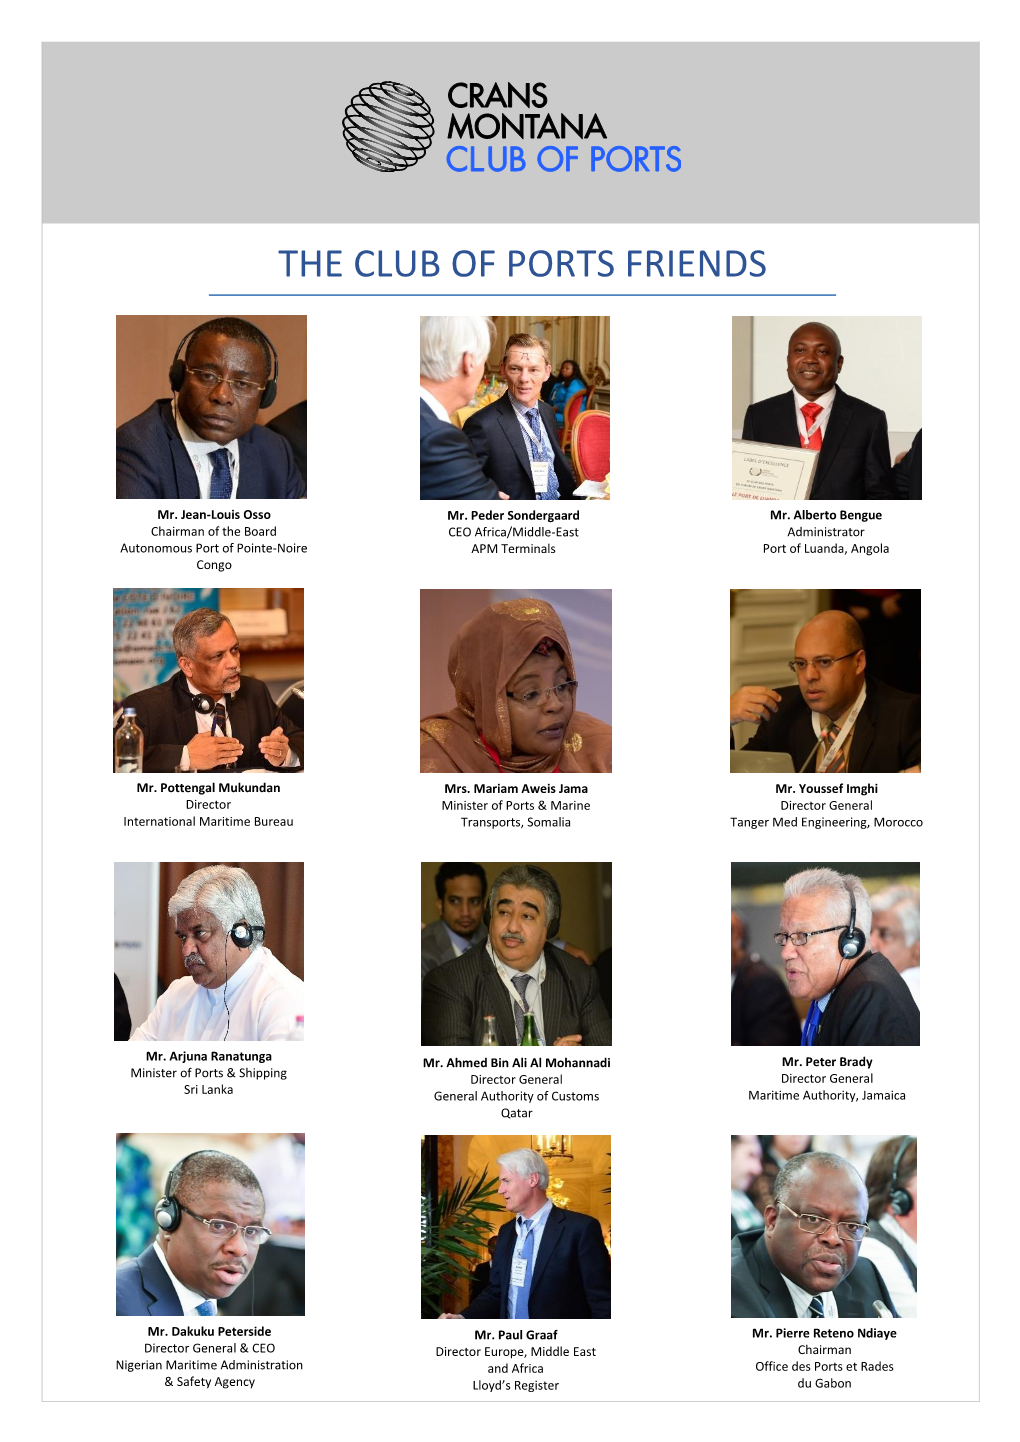 The Club of Ports Friends